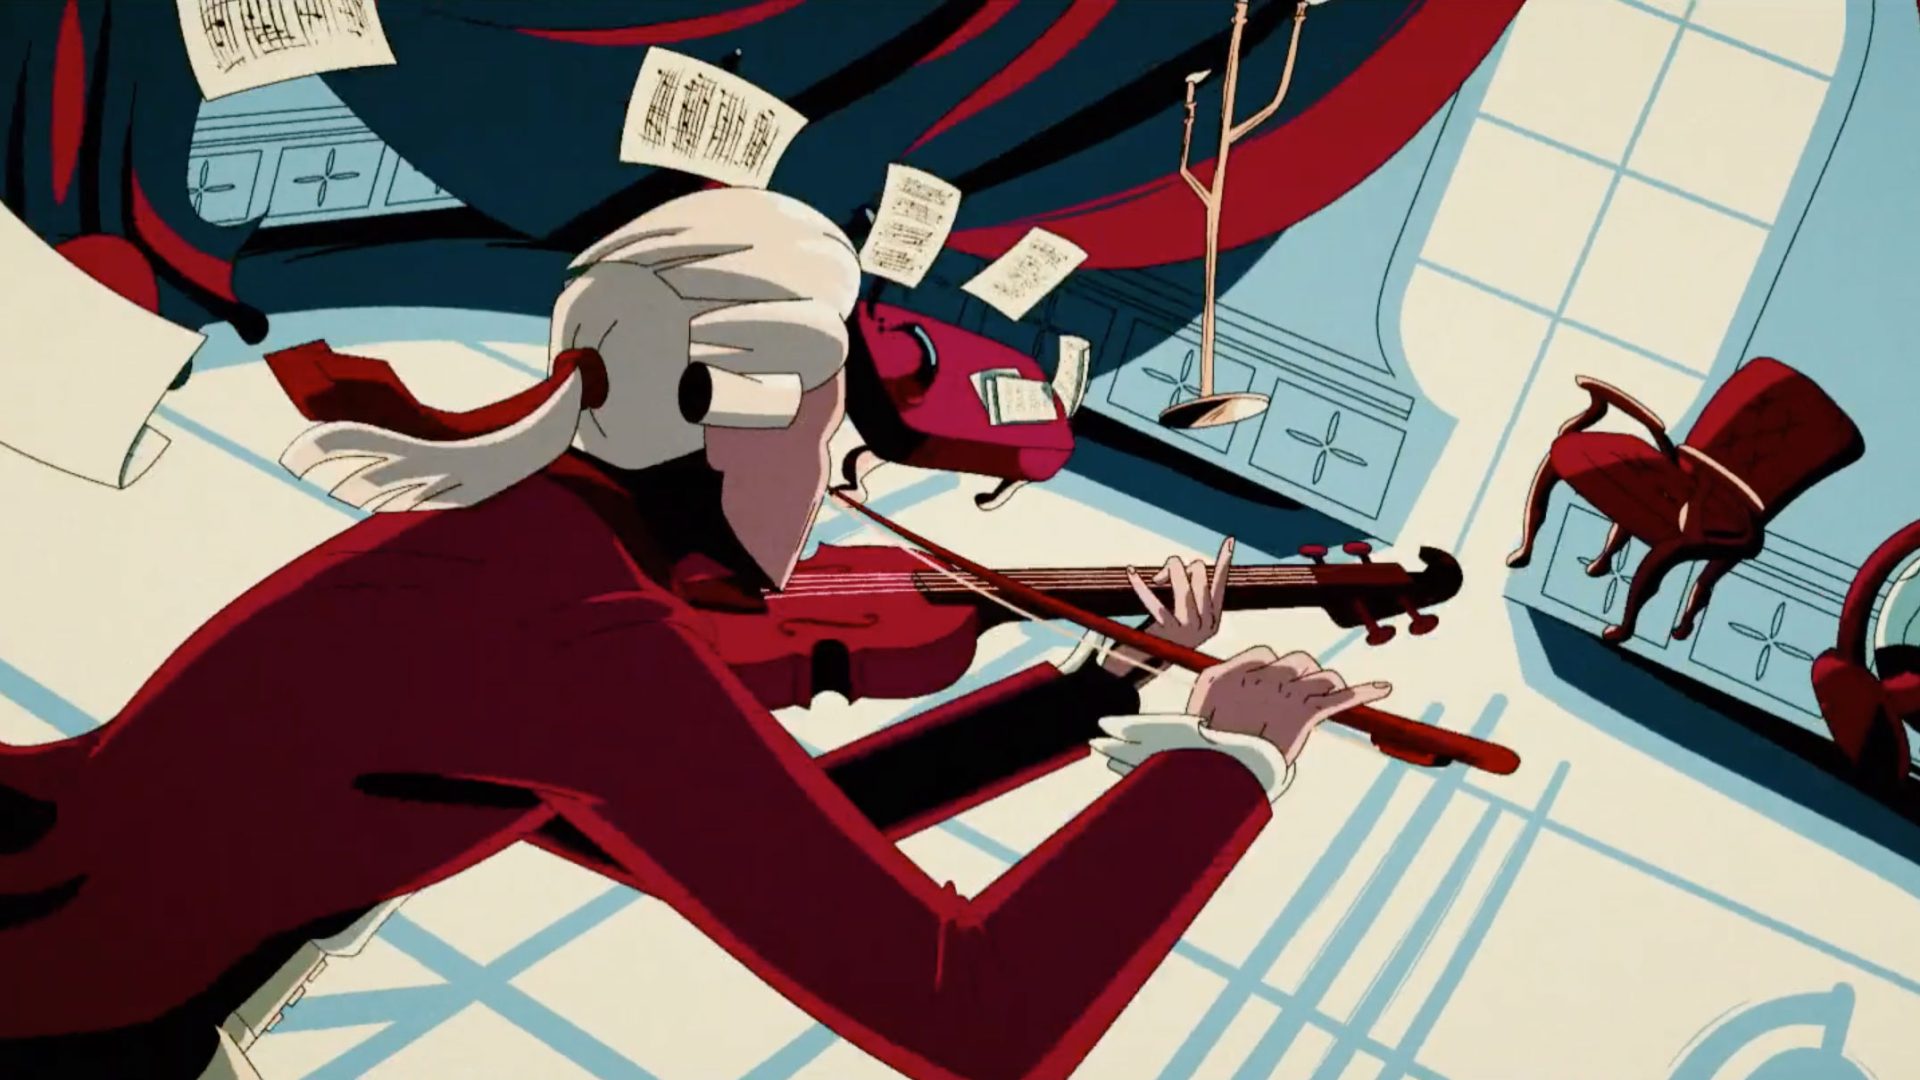 From the design and animation team at Le Cube: "'Mozart by Magnum' honors the great Master by presenting the first music video for a remix of his 25th Symphony's first movement (G minor, KV. 183). The film translates the dynamics and power of the music into images that captivate and draw the viewer directly into Mozart's creative process.